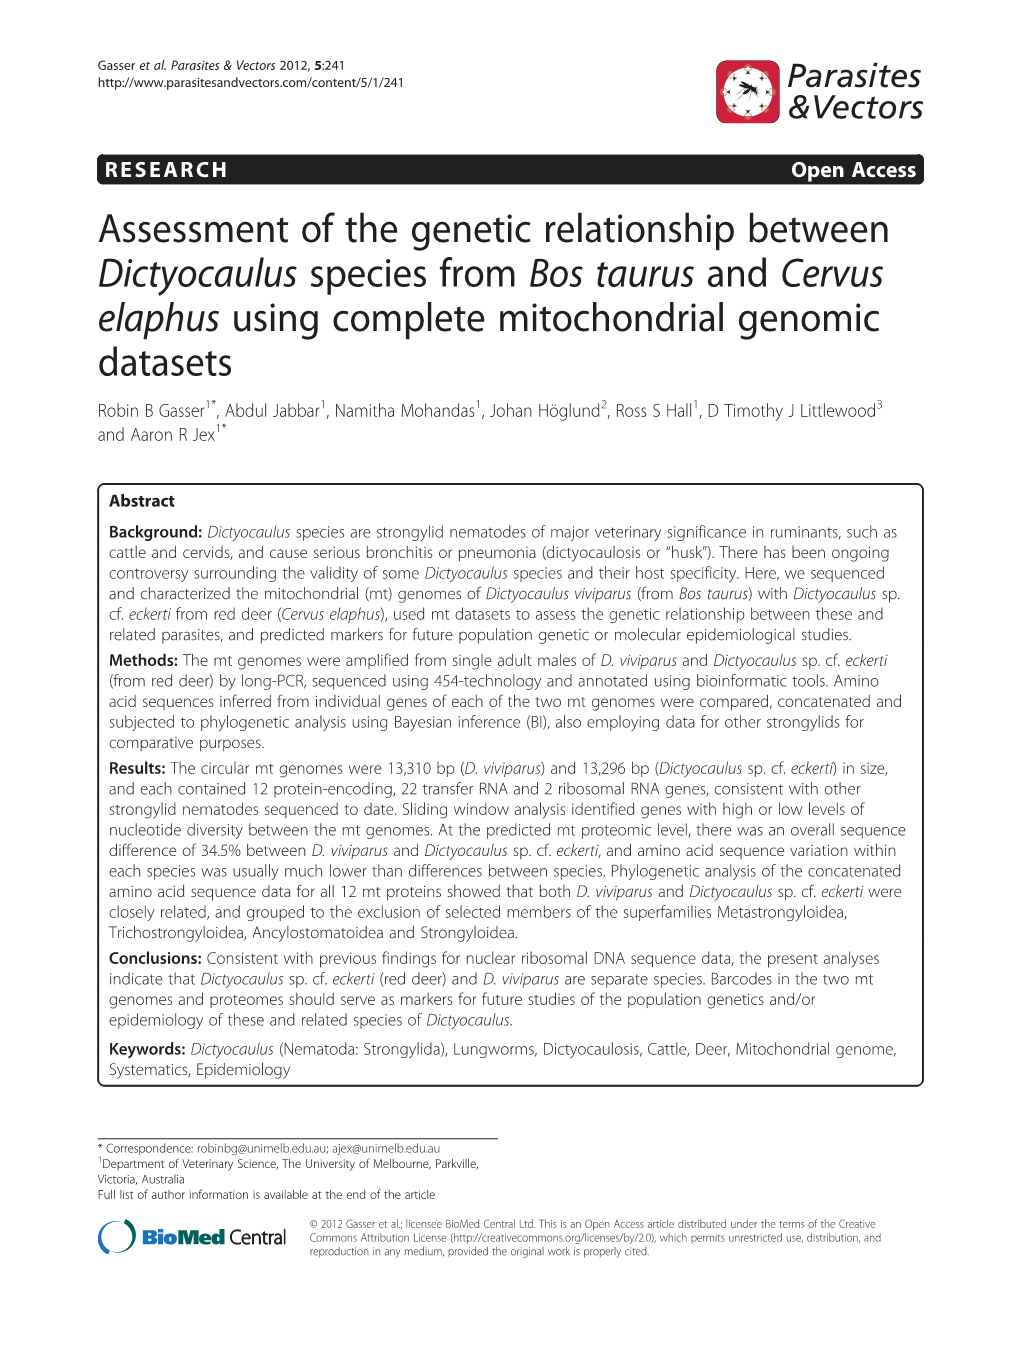 Assessment of the Genetic Relationship Between